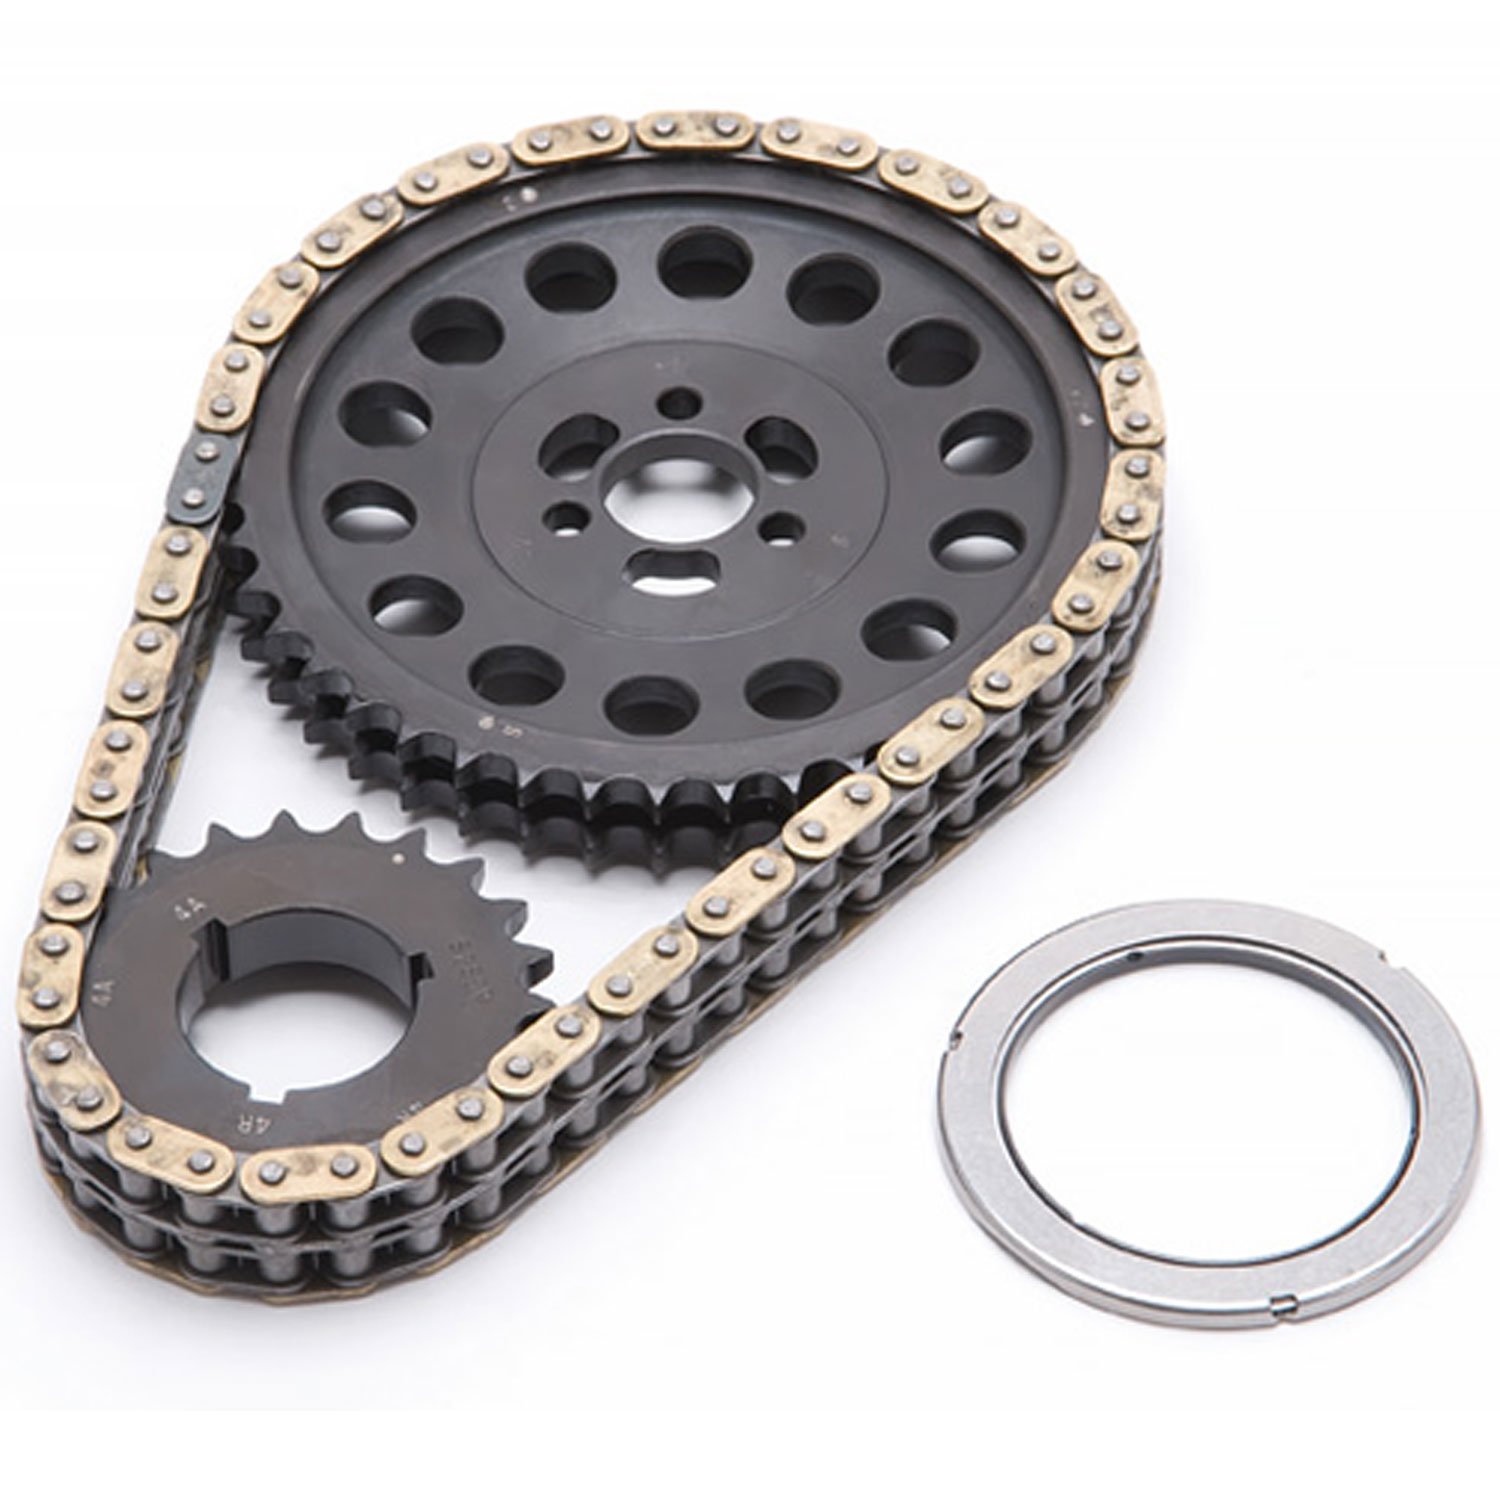 RPM-Link Timing Chain Set for 1955-1995 Small Block